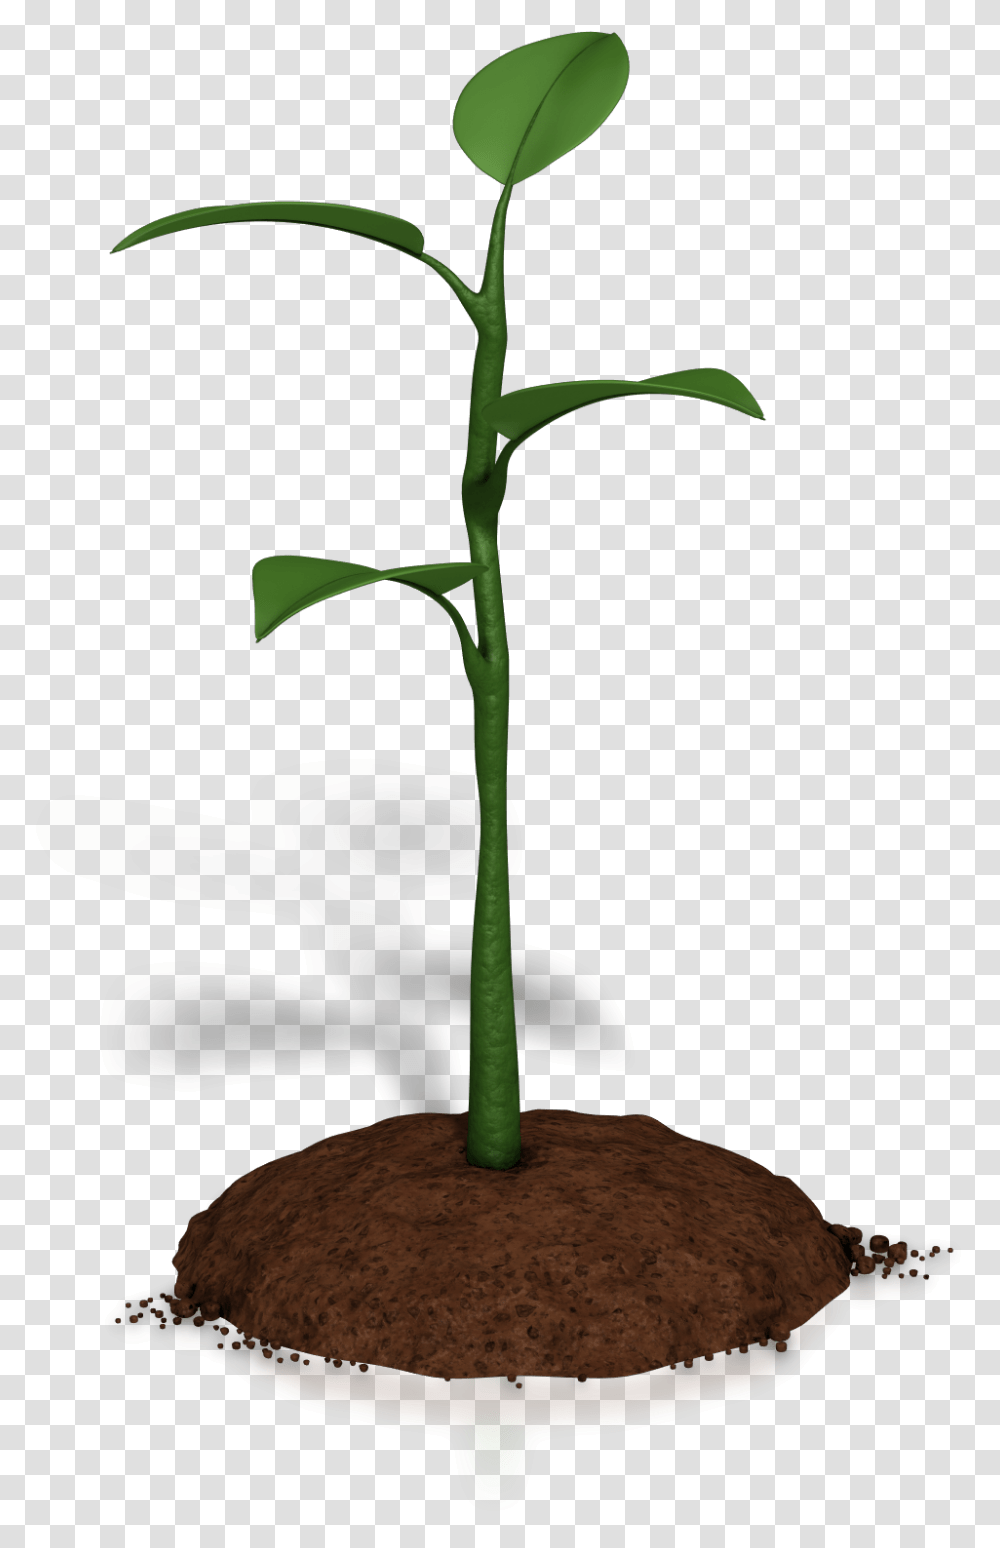 Soil Clipart Plant Growth Without Continual Growth And Progress Such Words, Vegetable, Food, Flower, Blossom Transparent Png